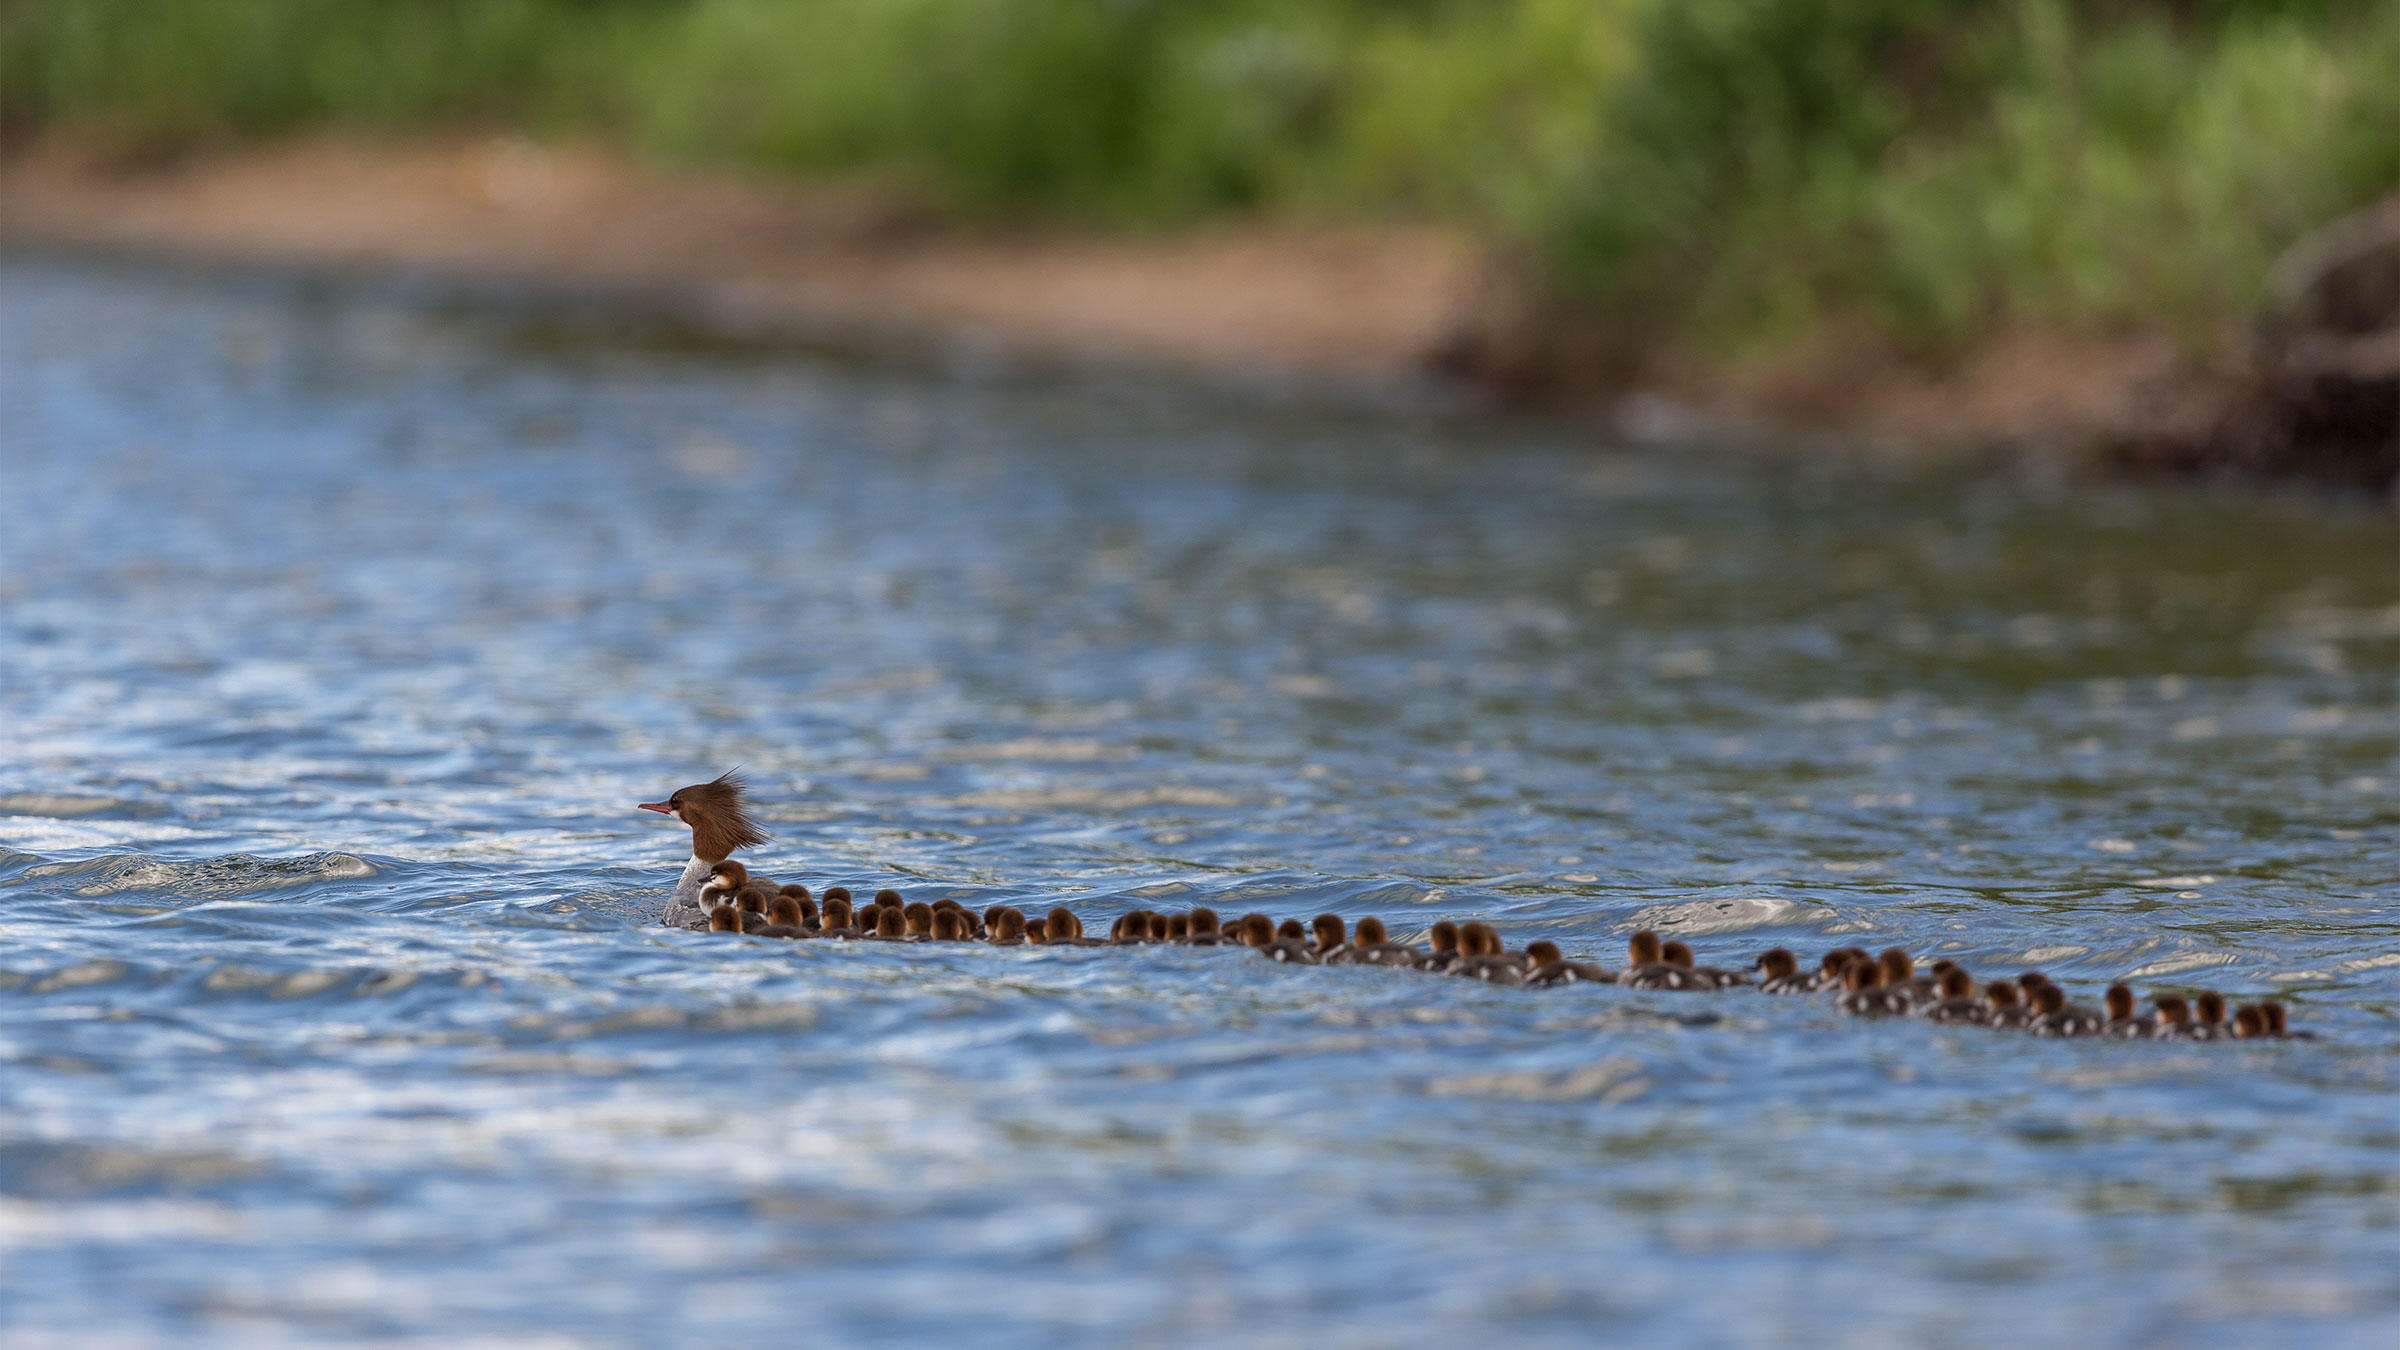 Superhero Mersanger momma with 56 ducklings in tow.